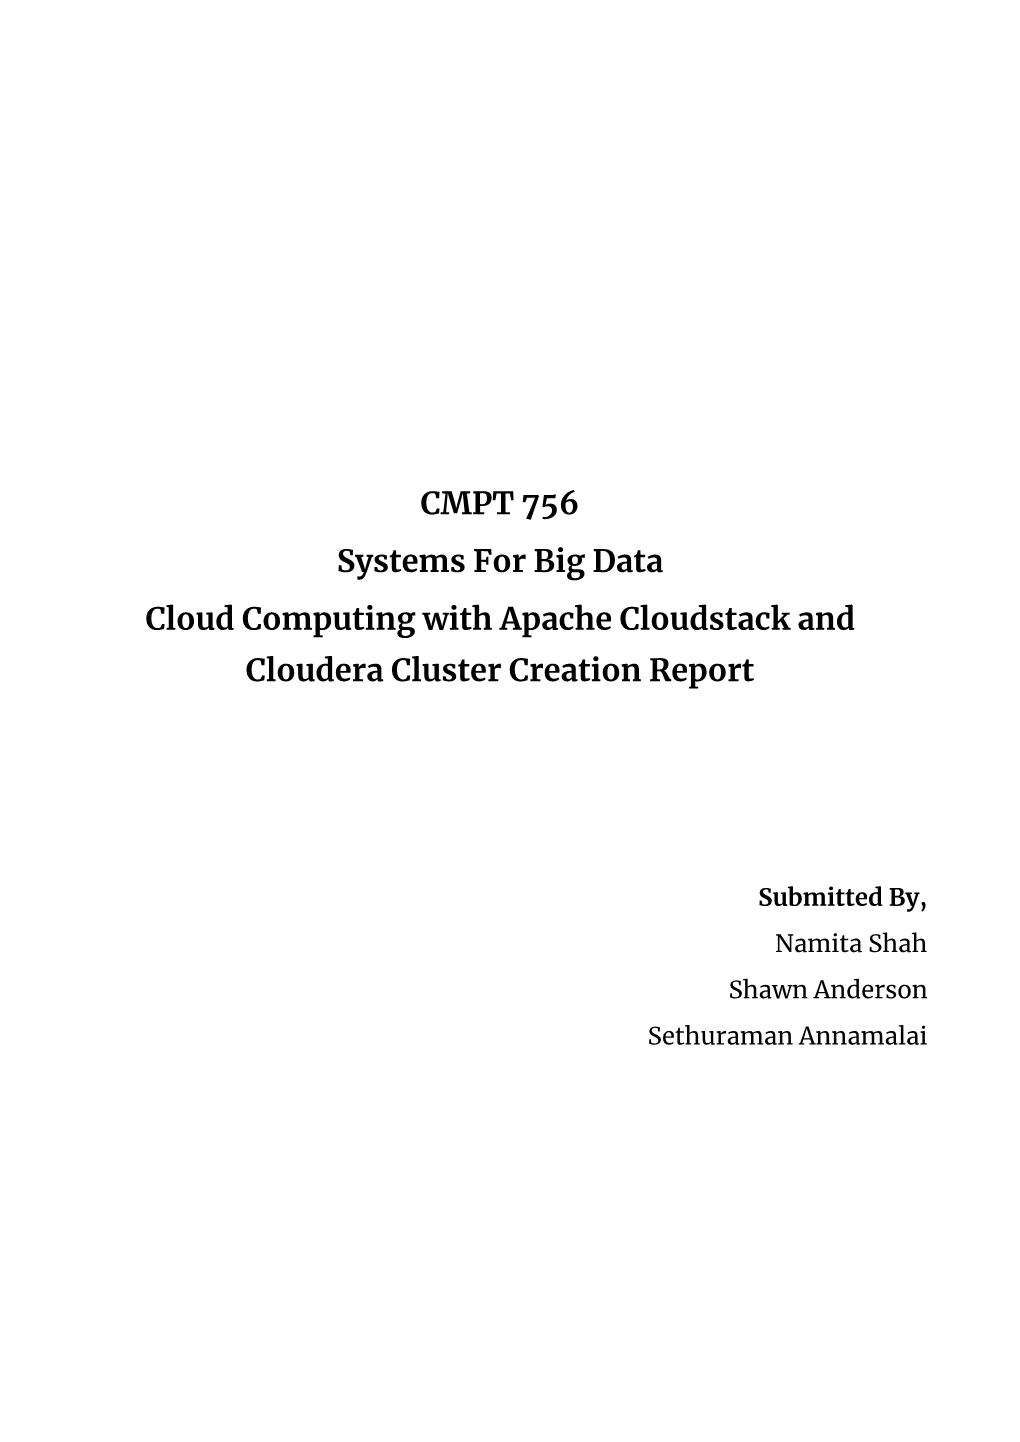 CMPT 756 Systems for Big Data Cloud Computing with Apache Cloudstack and Cloudera Cluster Creation Report